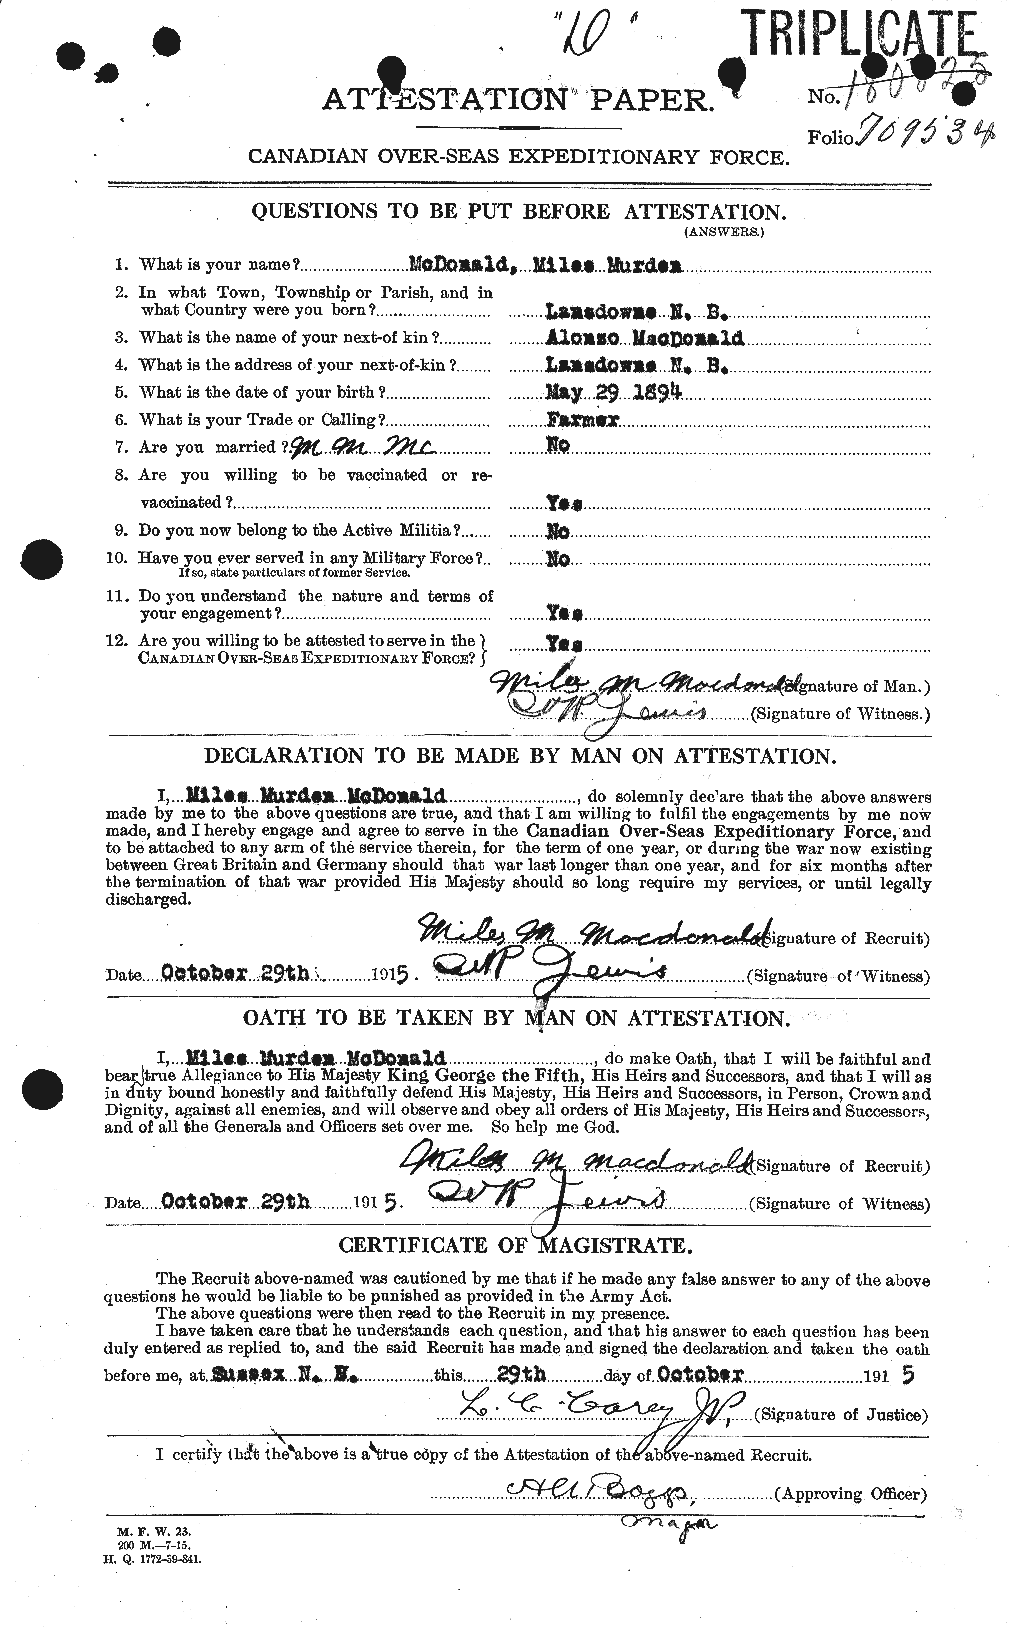 Personnel Records of the First World War - CEF 524633a